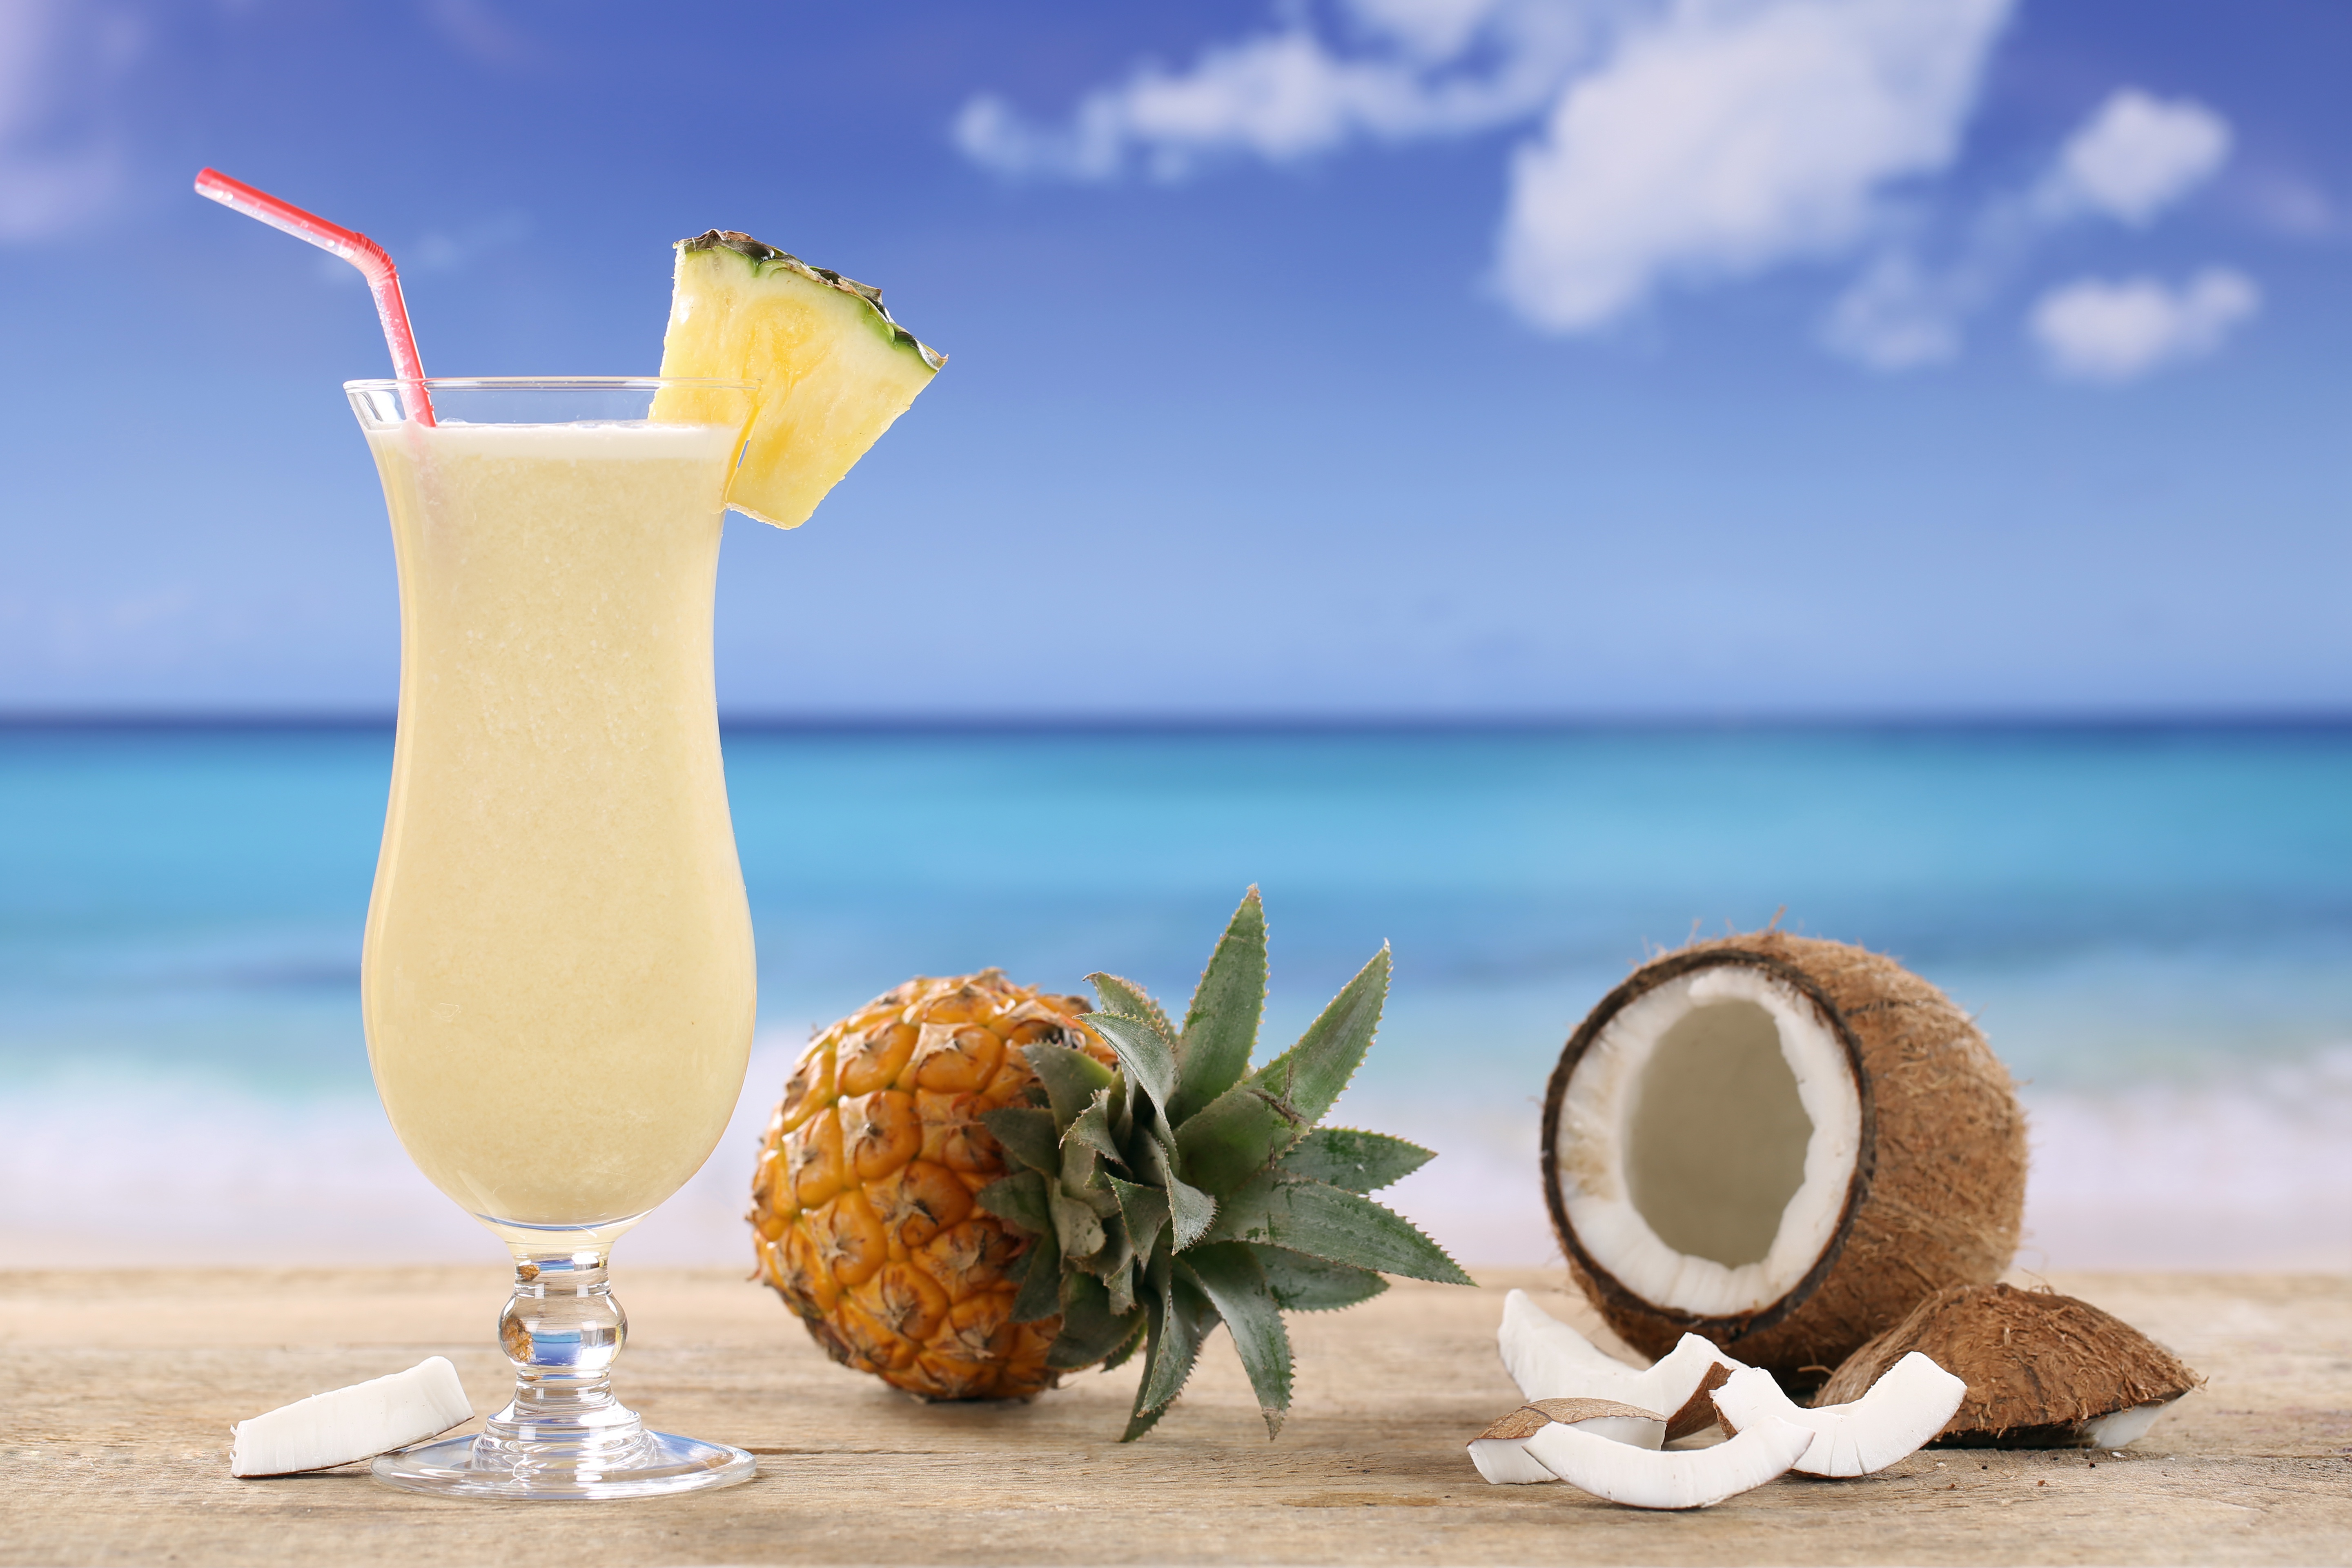 pineapple, food, cocktail, coconut, drink, glass